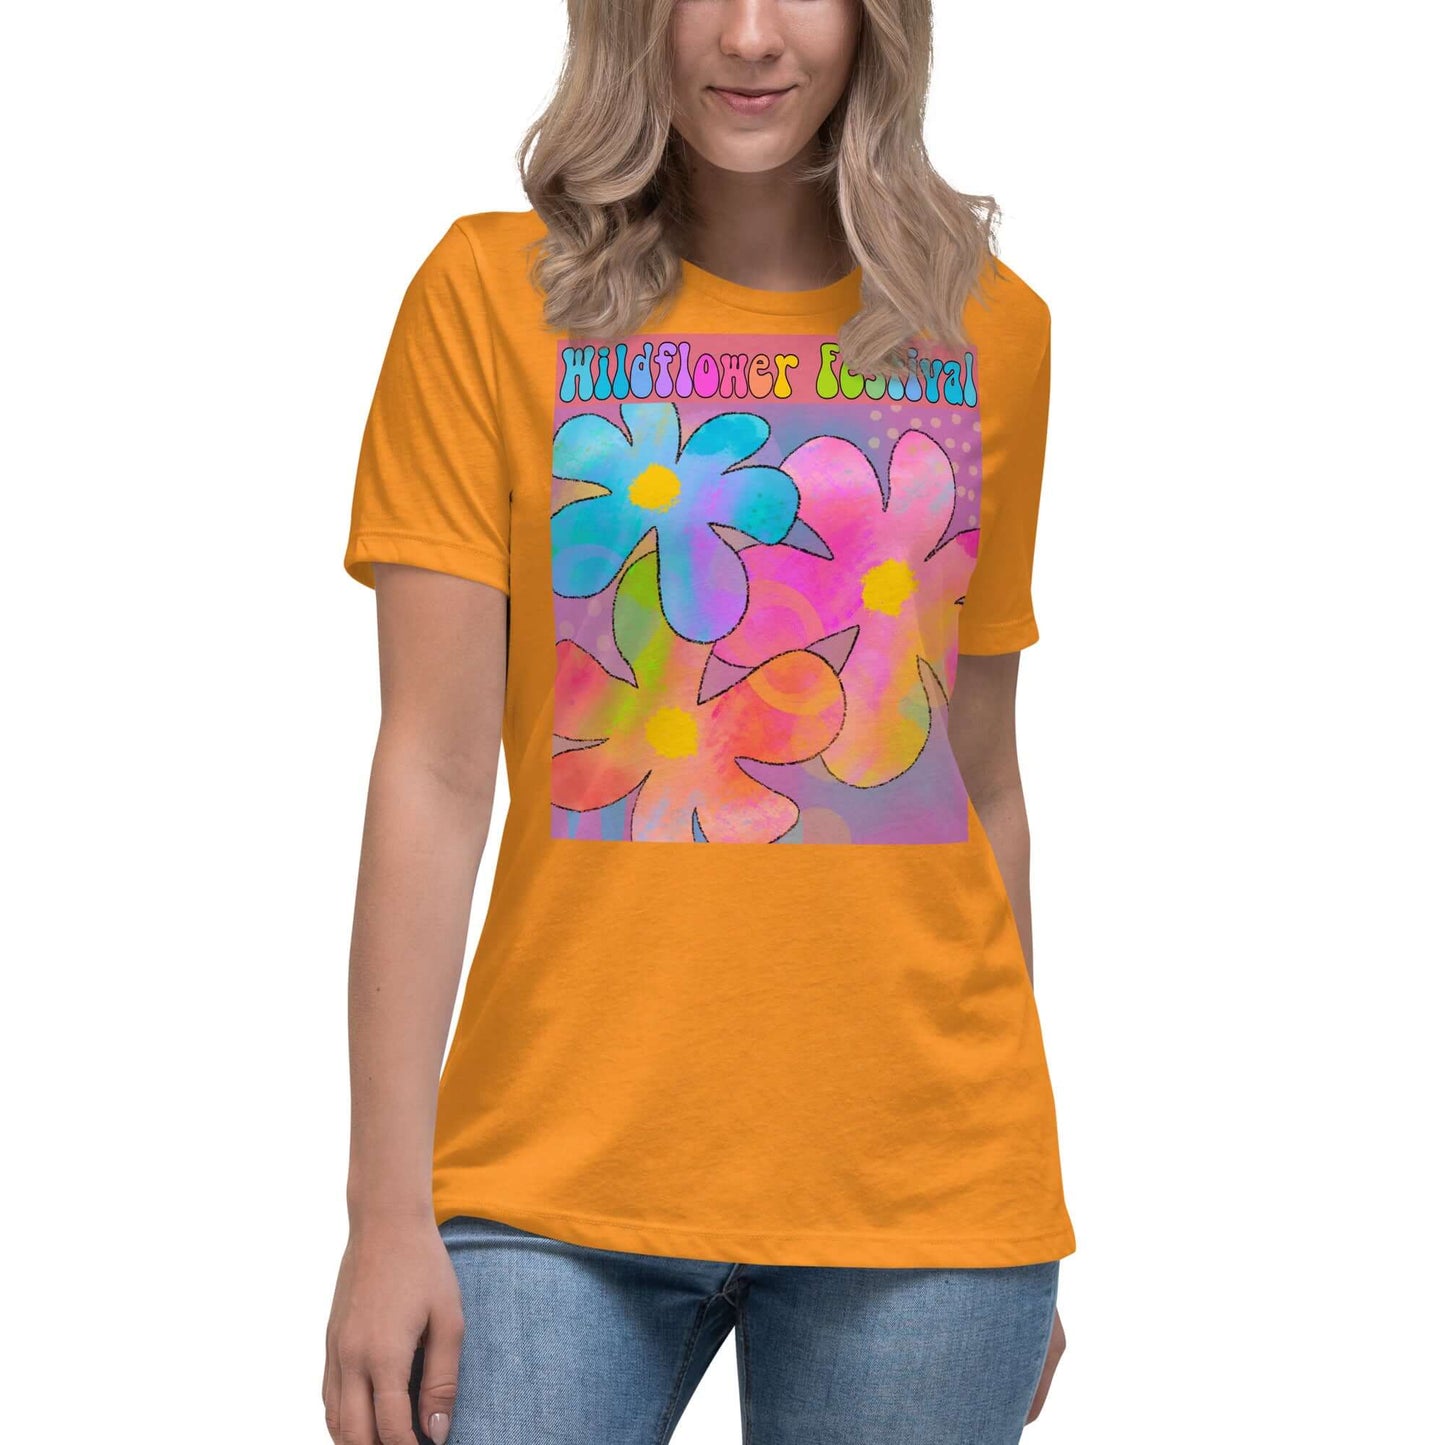 Big Colorful Hippie 1960s Psychedelic Flowers with Text “Wildflower Festival” Women’s Short Sleeve Tee in Heather Marmalade